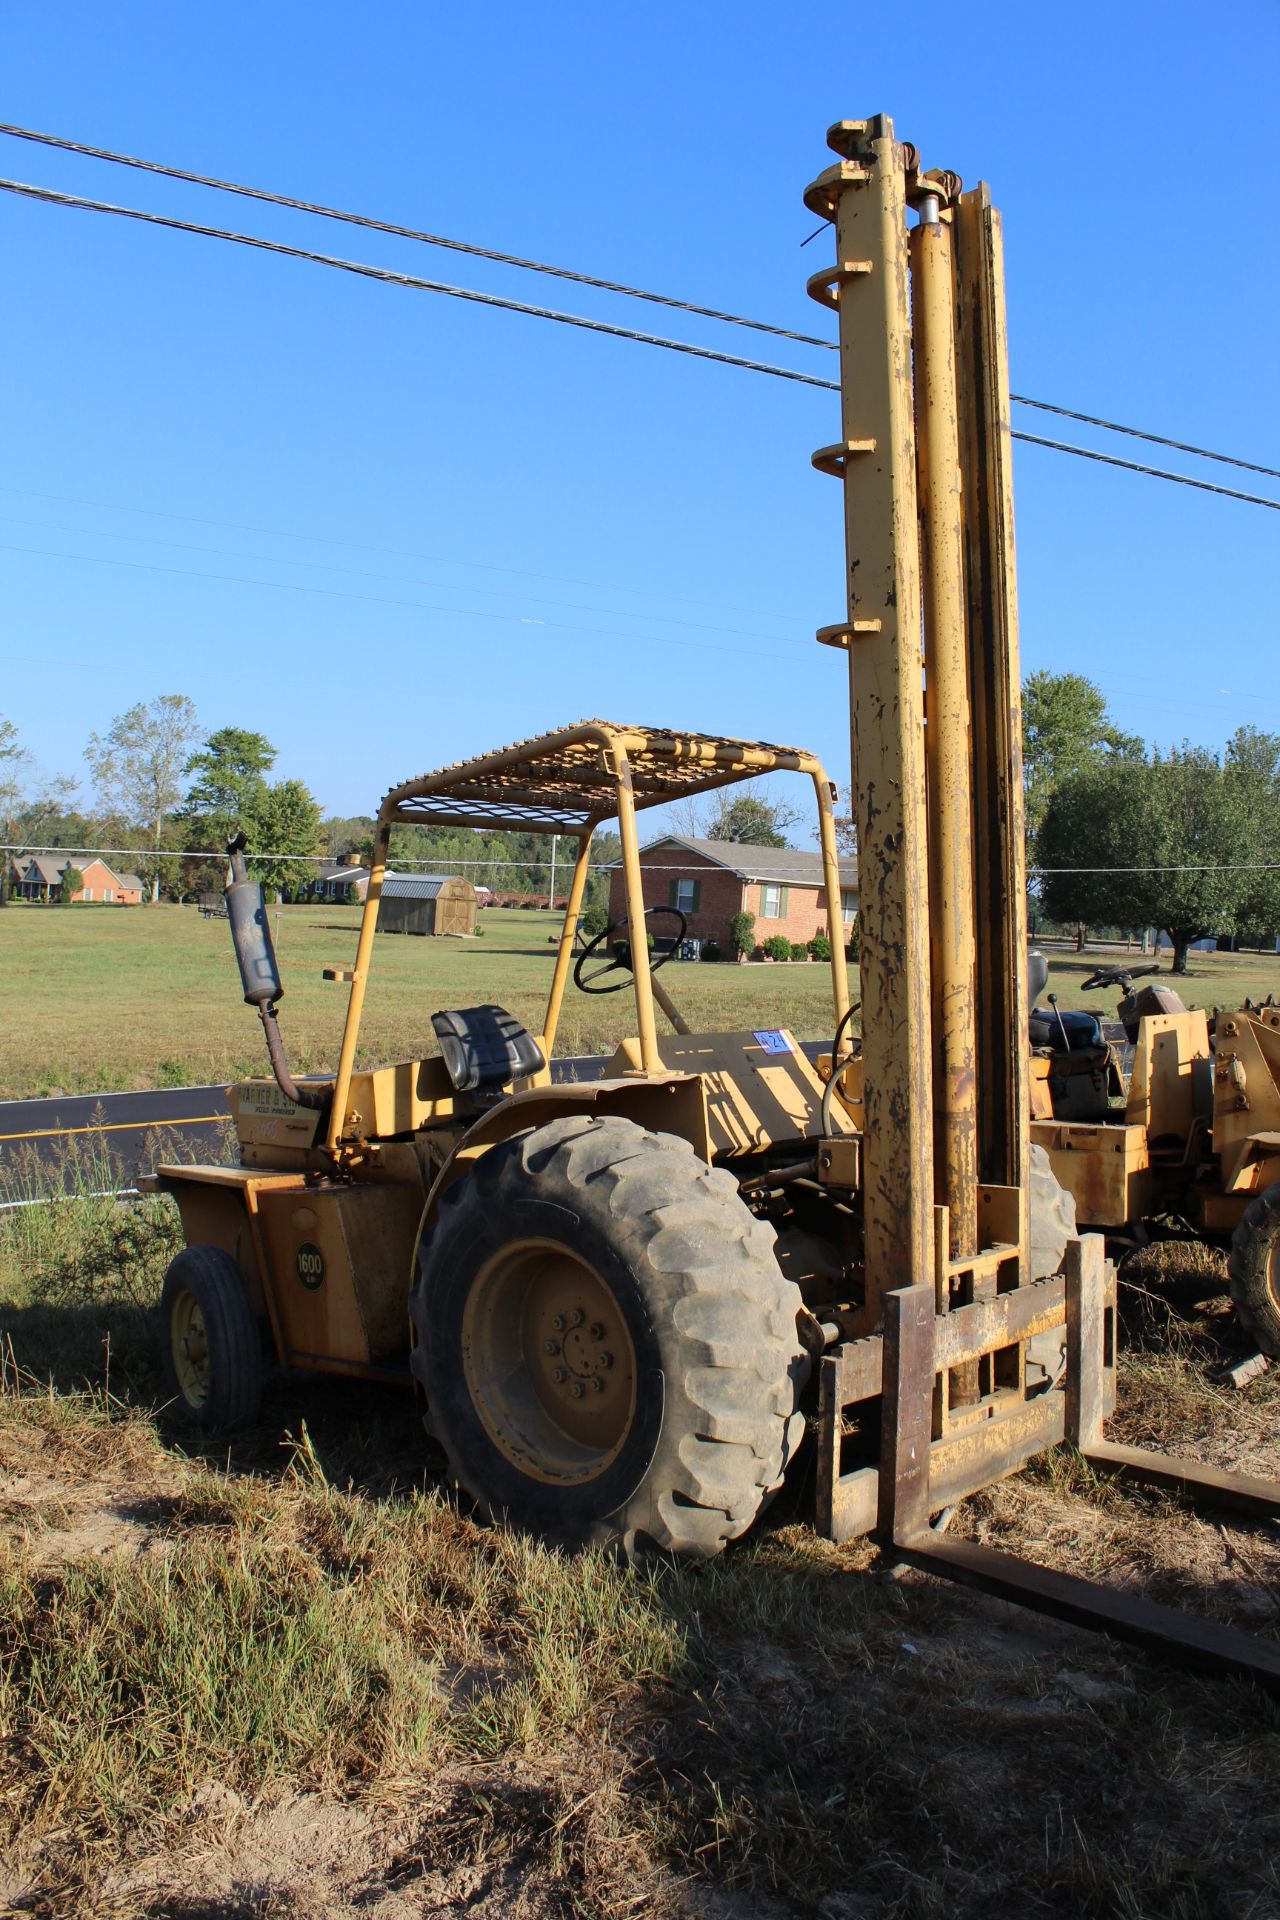 Warner & Swasey Model 1600LD Rough Terrain Forklift, Gas, 6000lb Capacity, 366" Lift Height, 3 Stage - Image 2 of 2